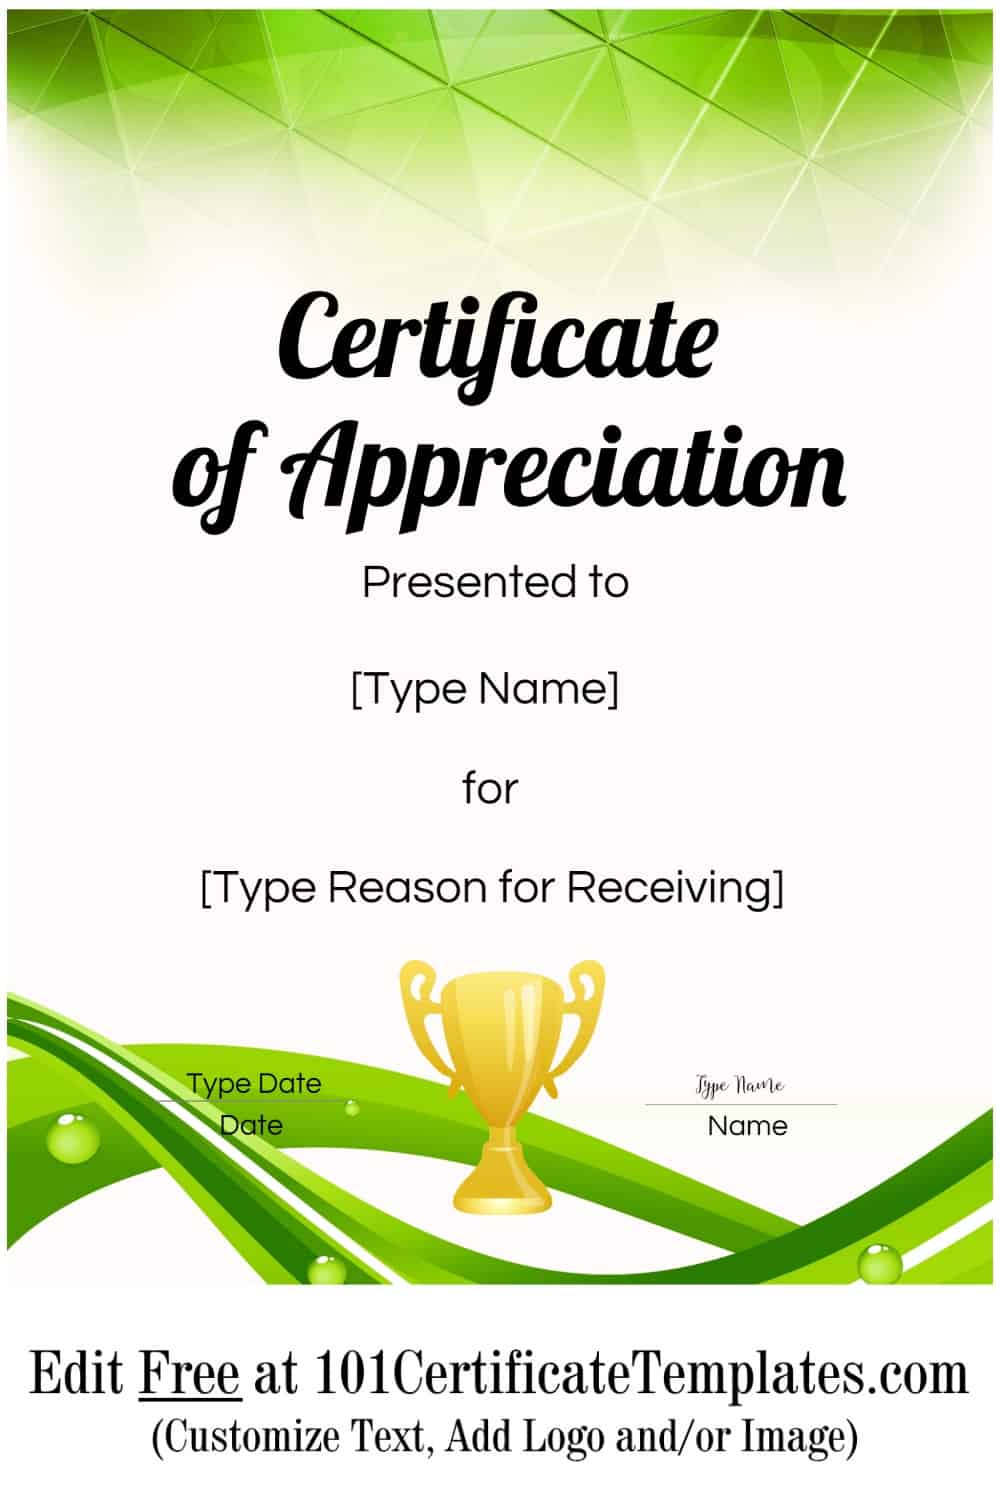 certificates-of-appreciation-templates-for-word-doctemplates